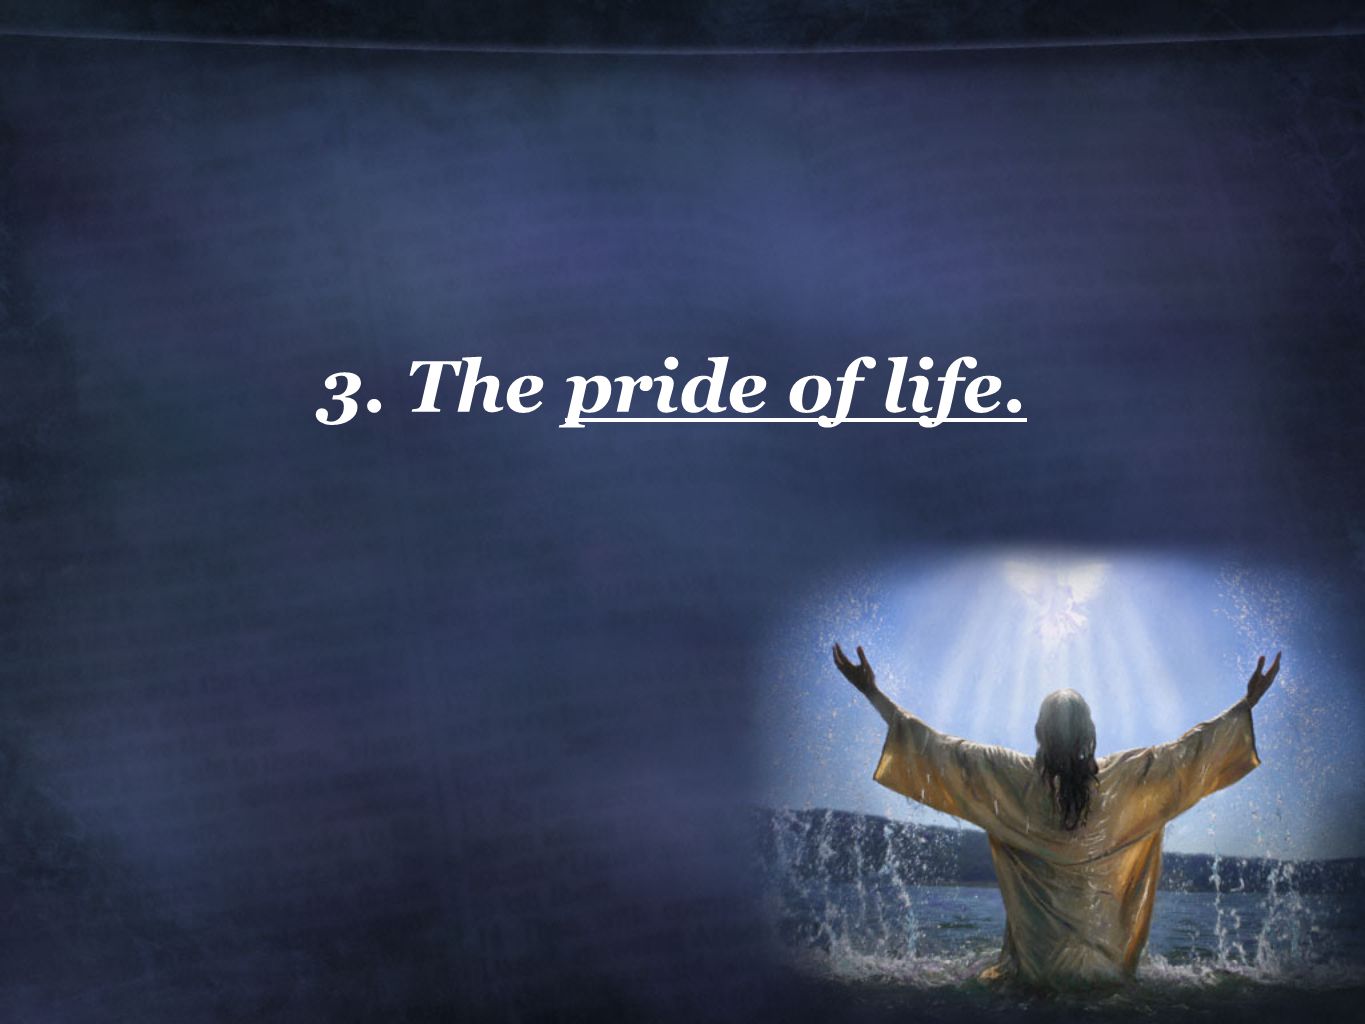 3. The pride of life.